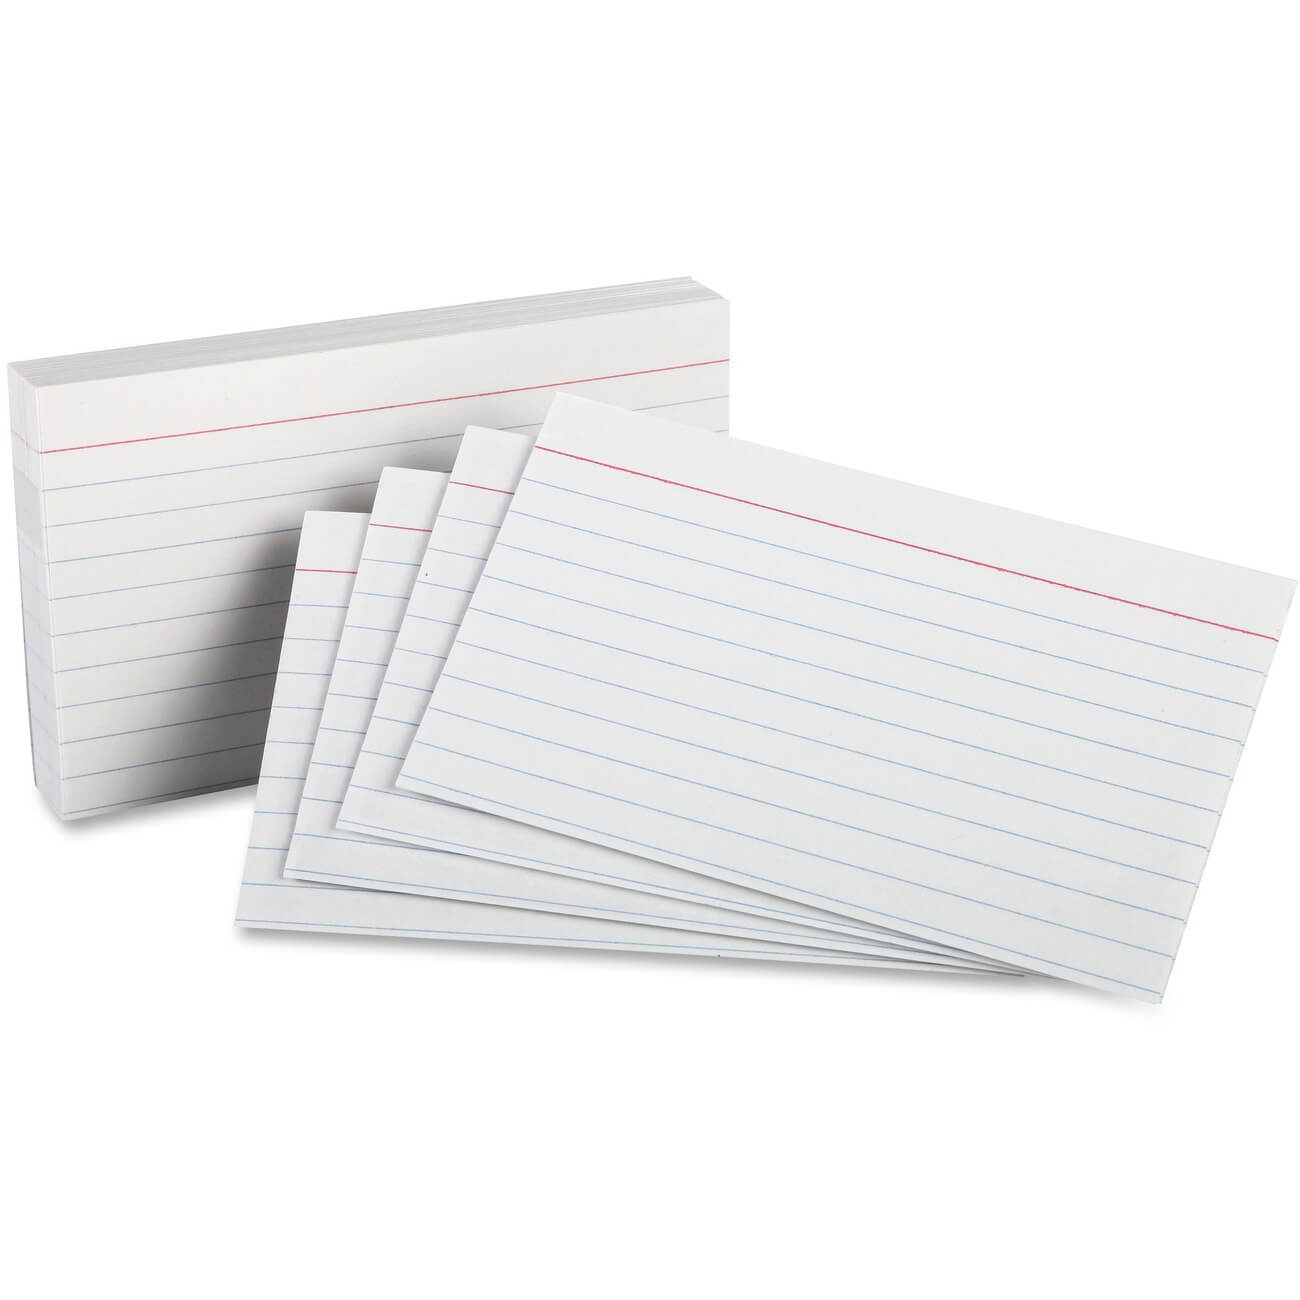 Kamloops Office Systems :: Office Supplies :: Paper & Pads Pertaining To 5 By 8 Index Card Template